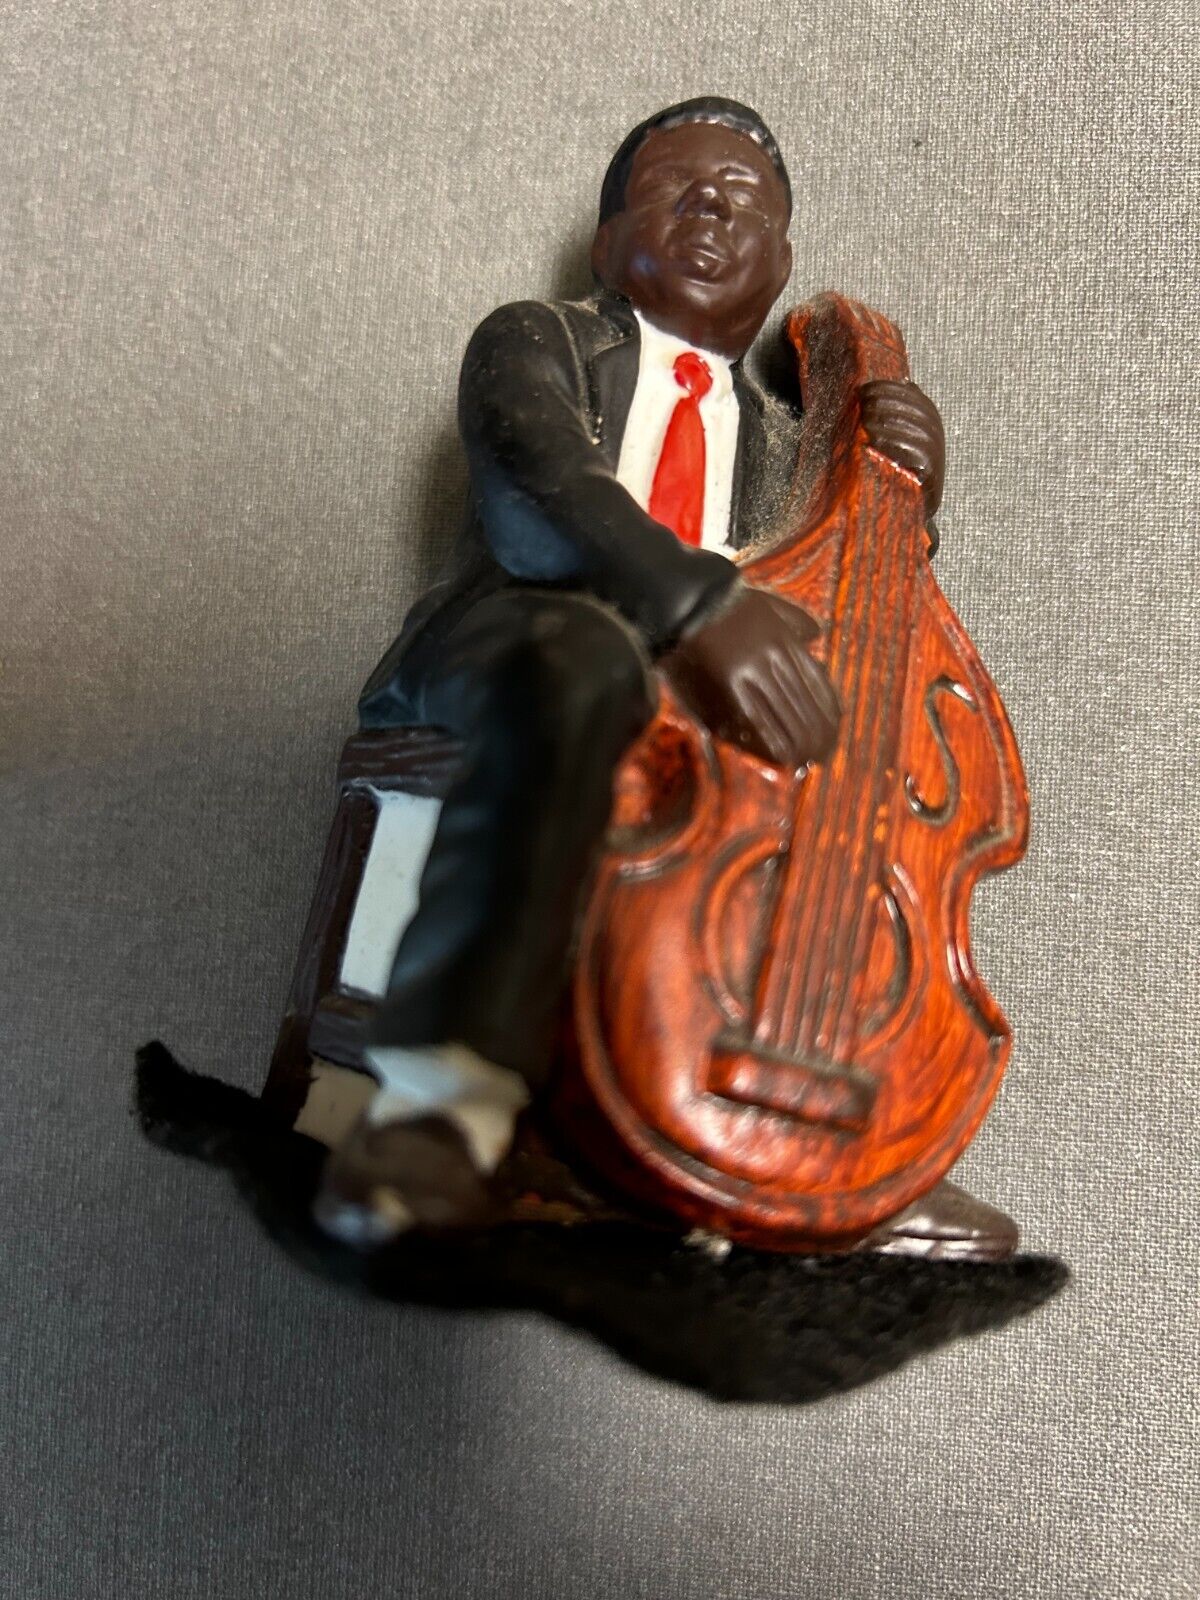 2 Vintage African American Jazz Musicians Playing Instruments Figurines